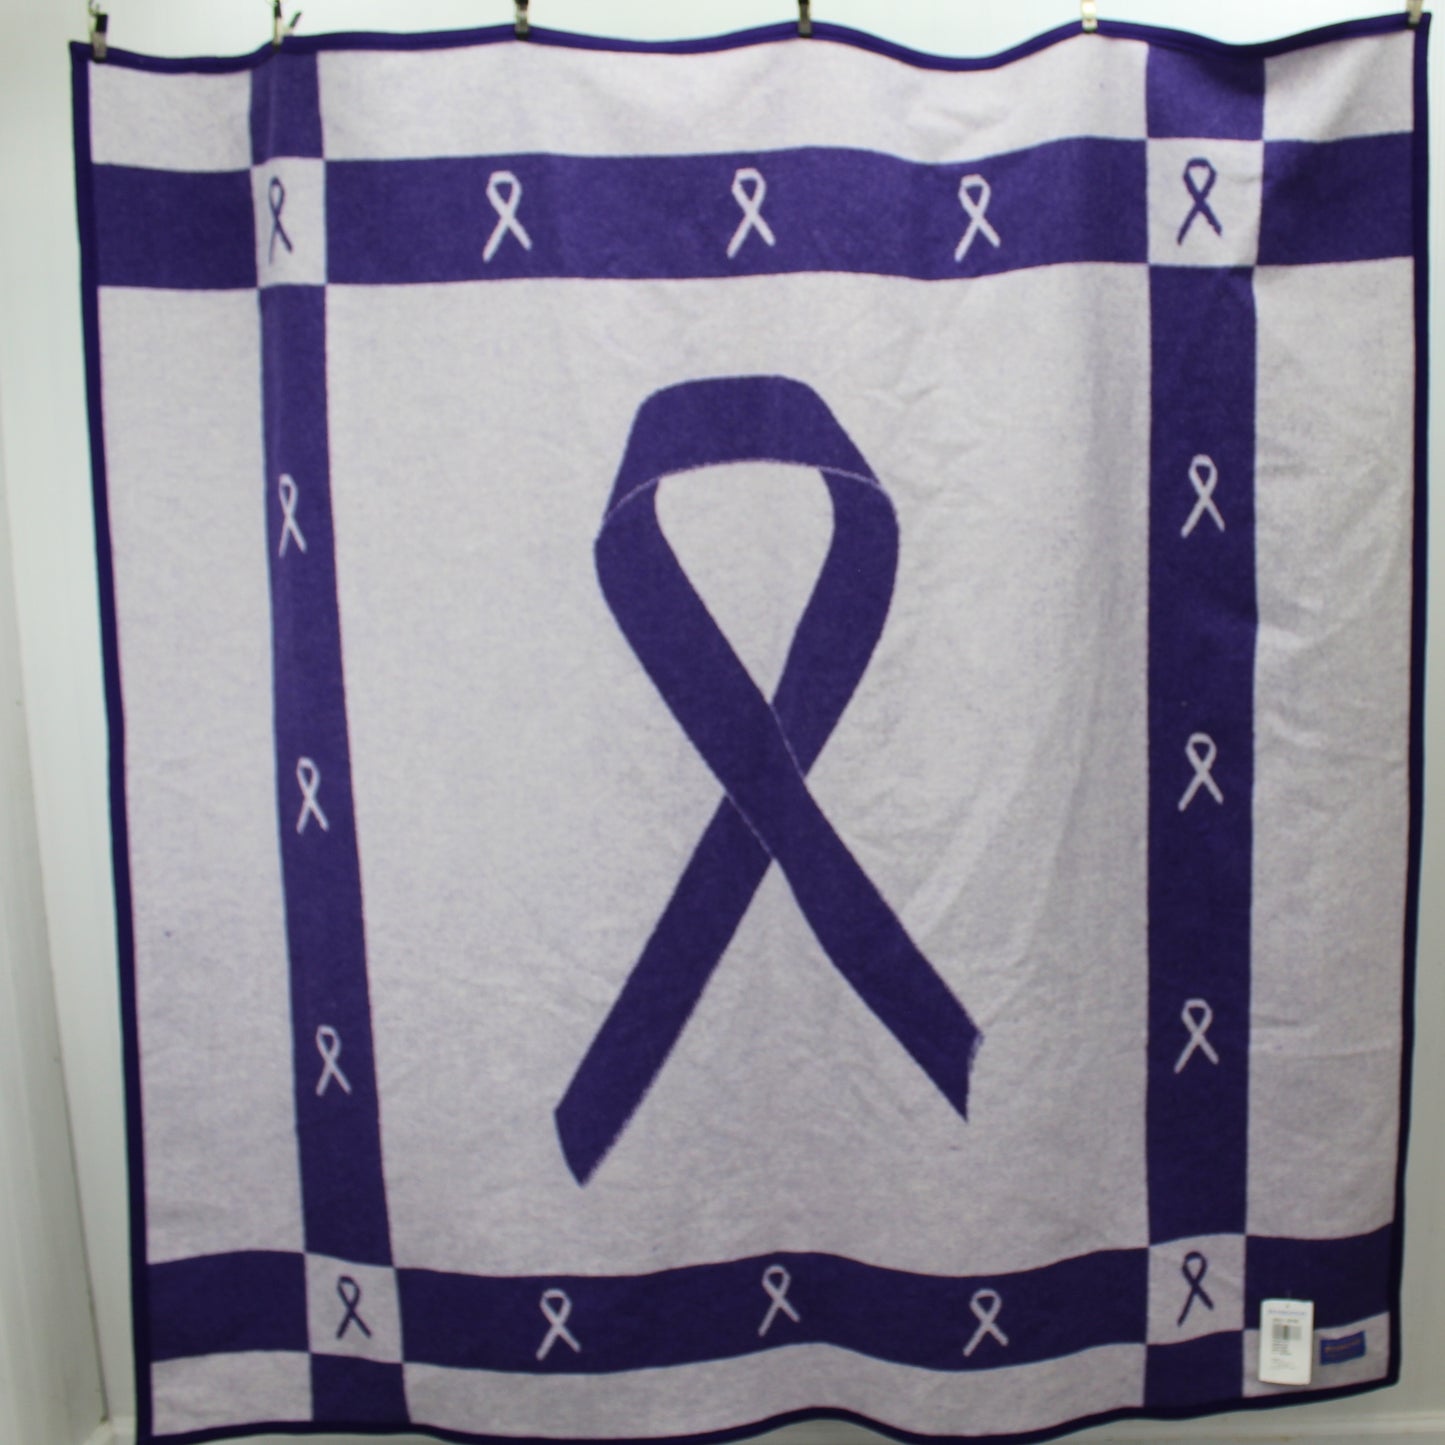 New With Tags Pendleton Wool Cotton Blanket Purple Ribbon Domestic Violence full view